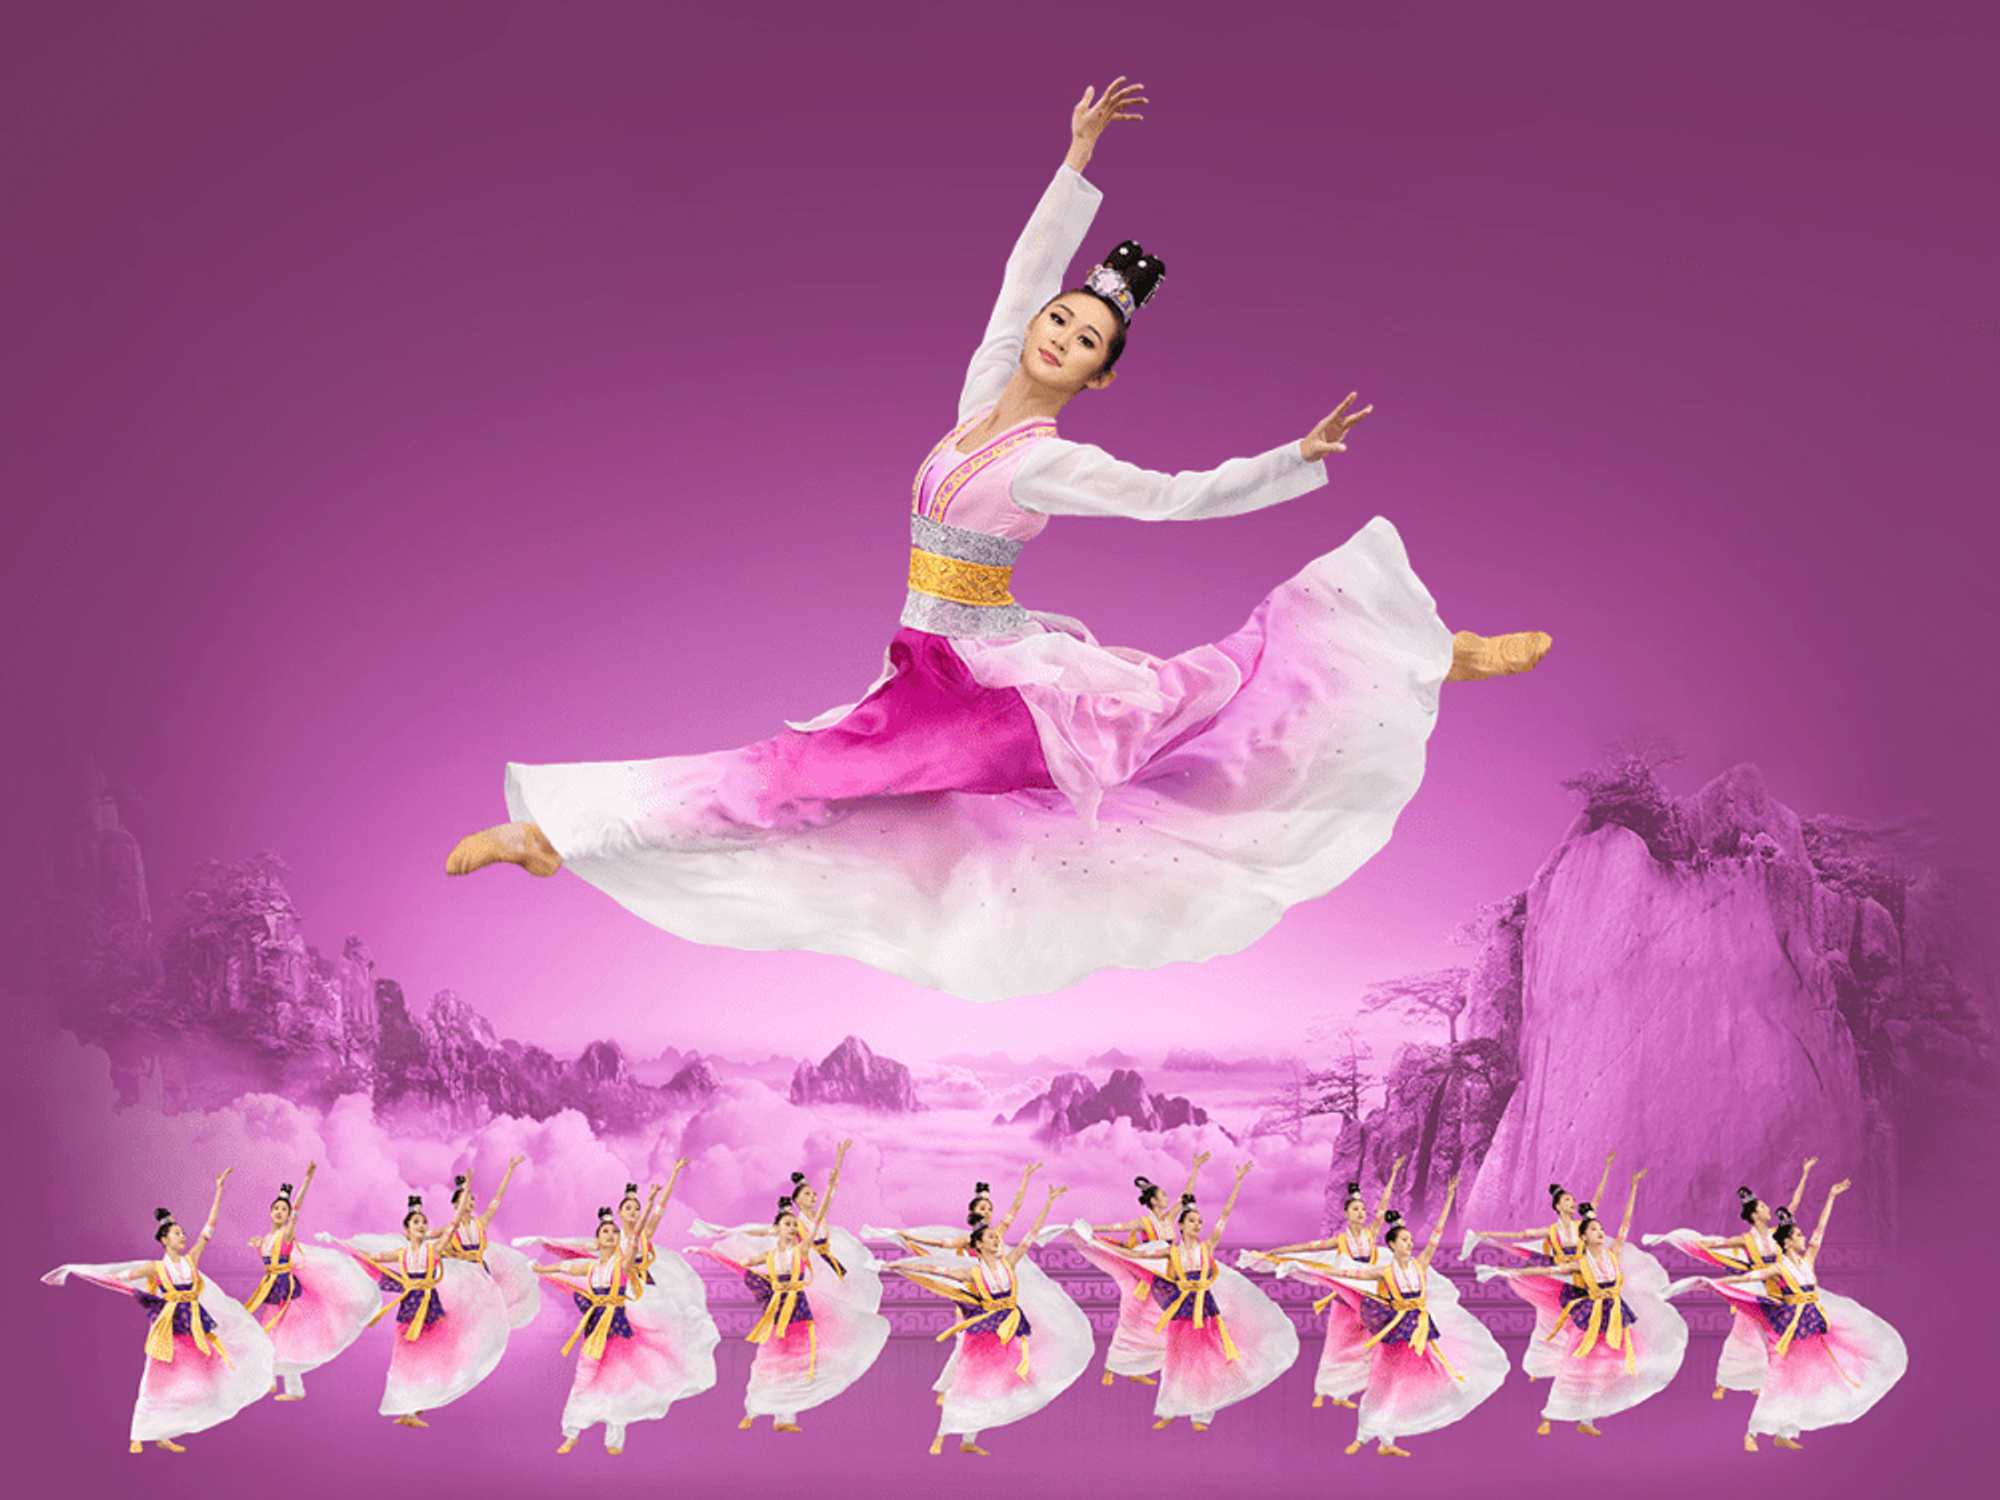 Through music, song, folk dances, animated backdrops and story telling, Shen Yun journeys through 5,000 years of Chinese history.